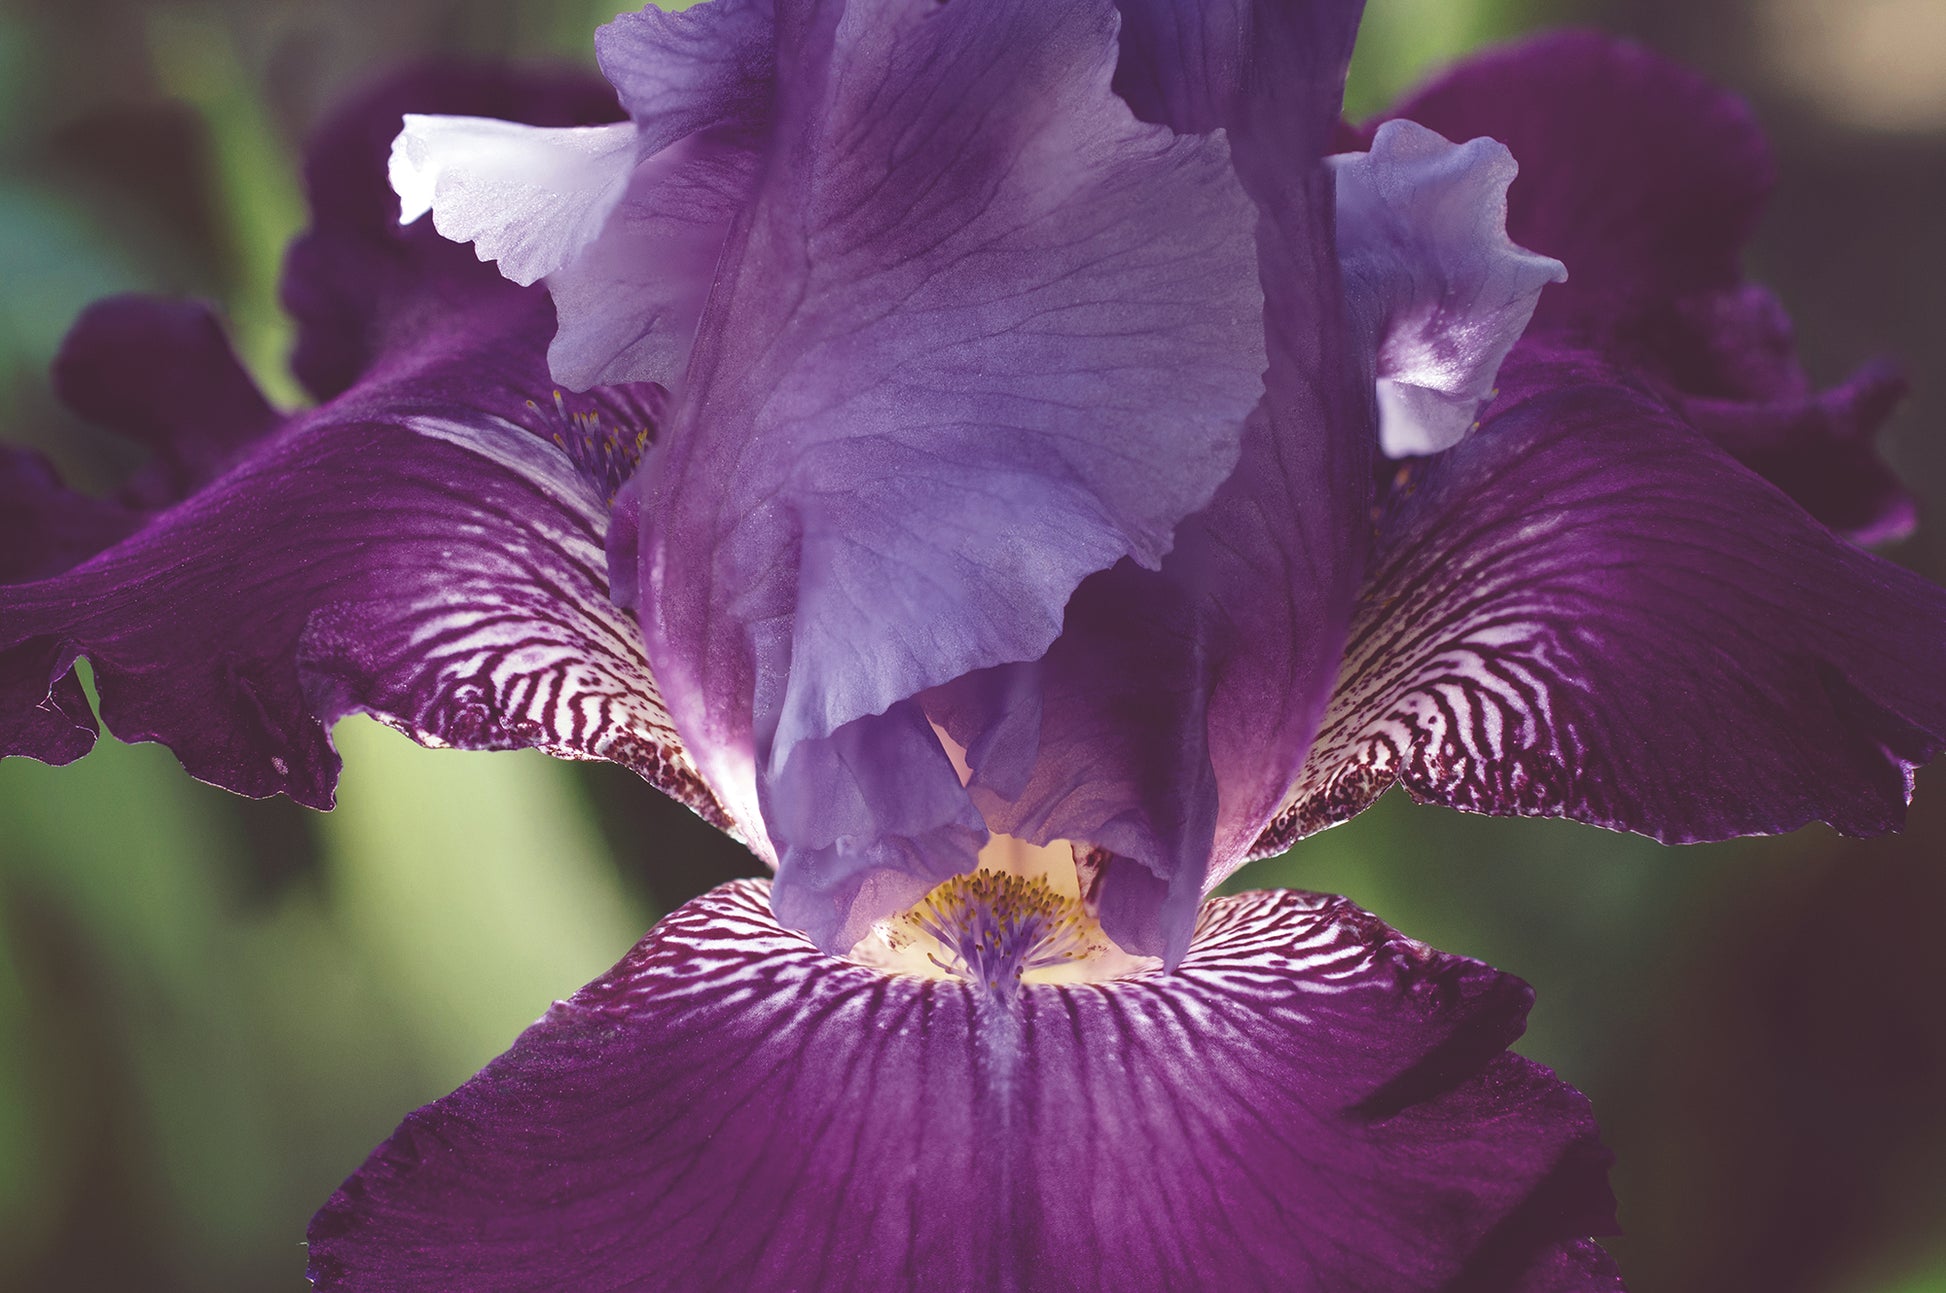 Glowing Iris Moody Midnight Floral Photo Fine Art Canvas Wall Art Prints  - PIPAFINEART